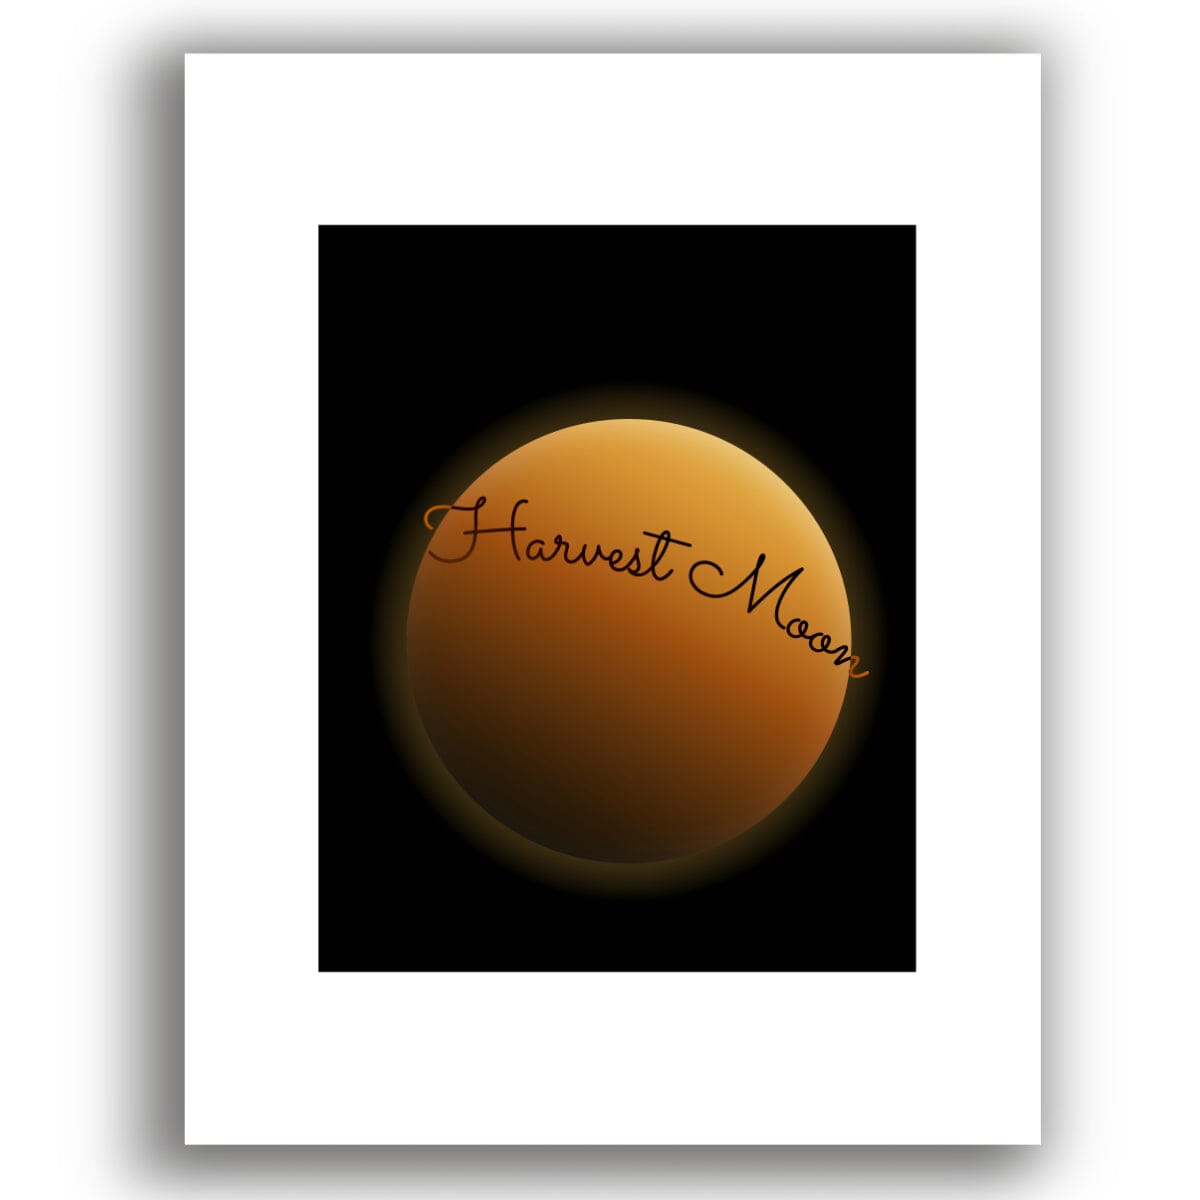 Harvest Moon by Neil Young - Music Song Lyric Print Artwork Song Lyrics Art Song Lyrics Art 8x10 White Matted Print 